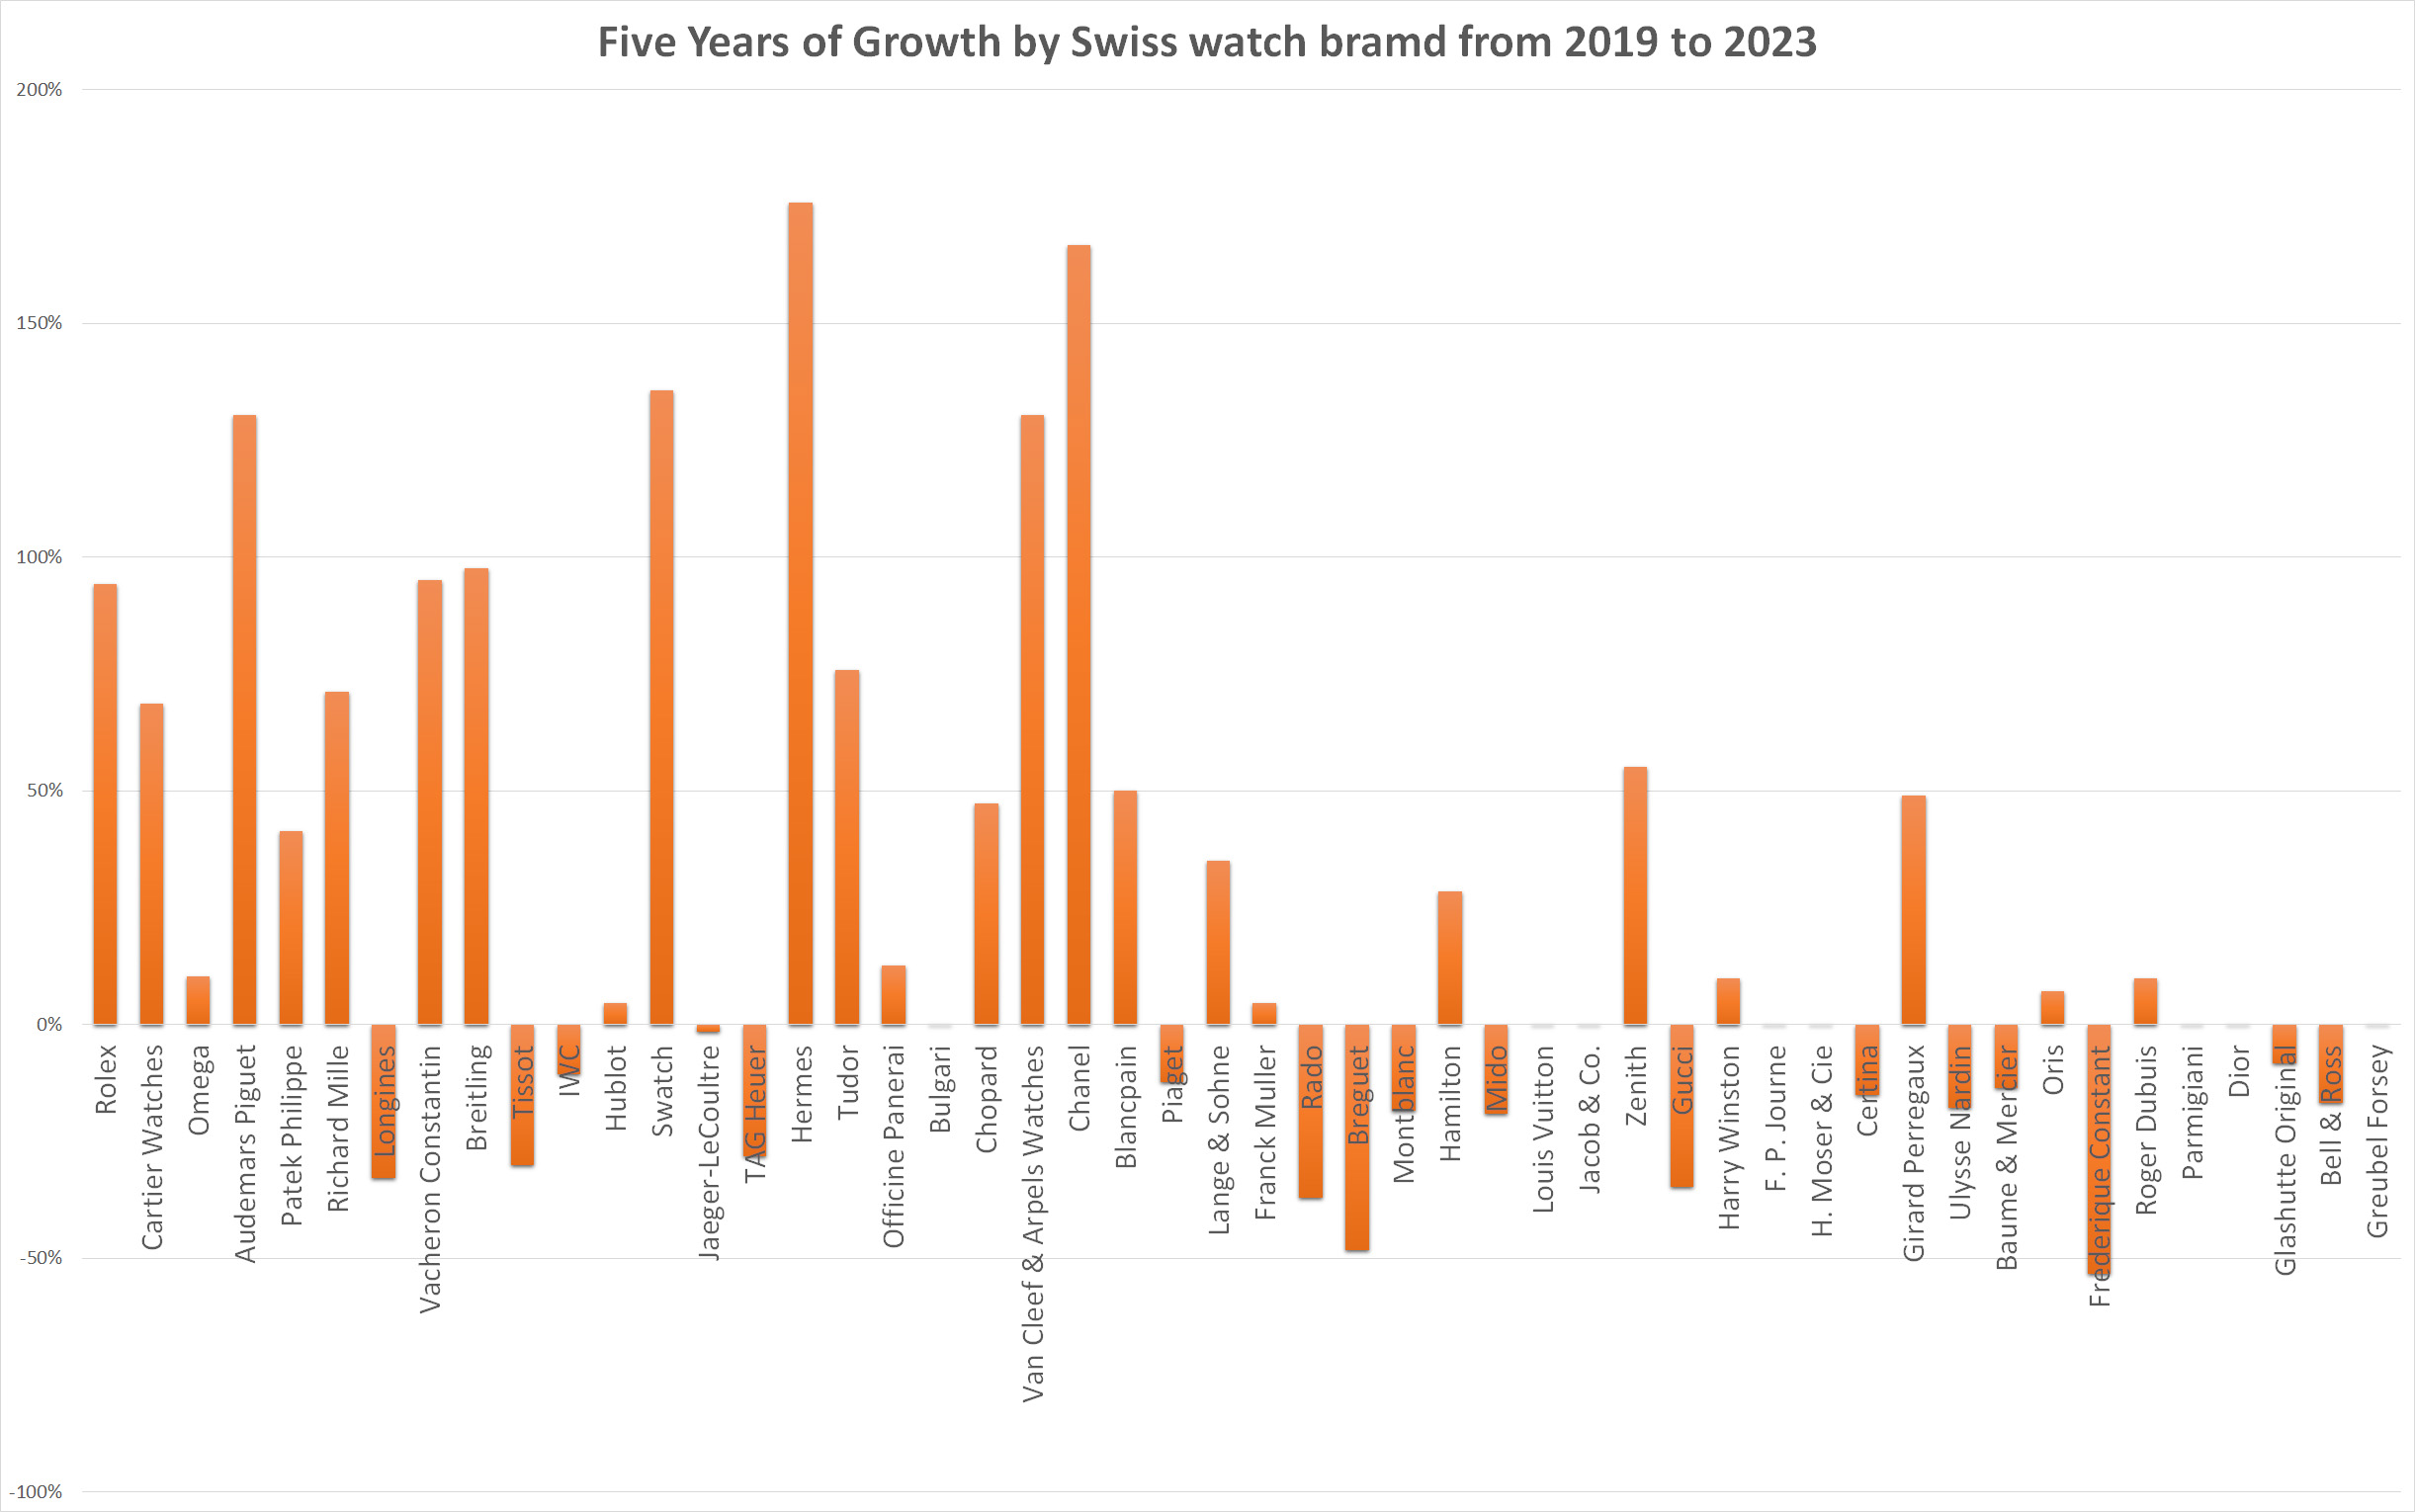 Sales by watch brand 2019 to 2023